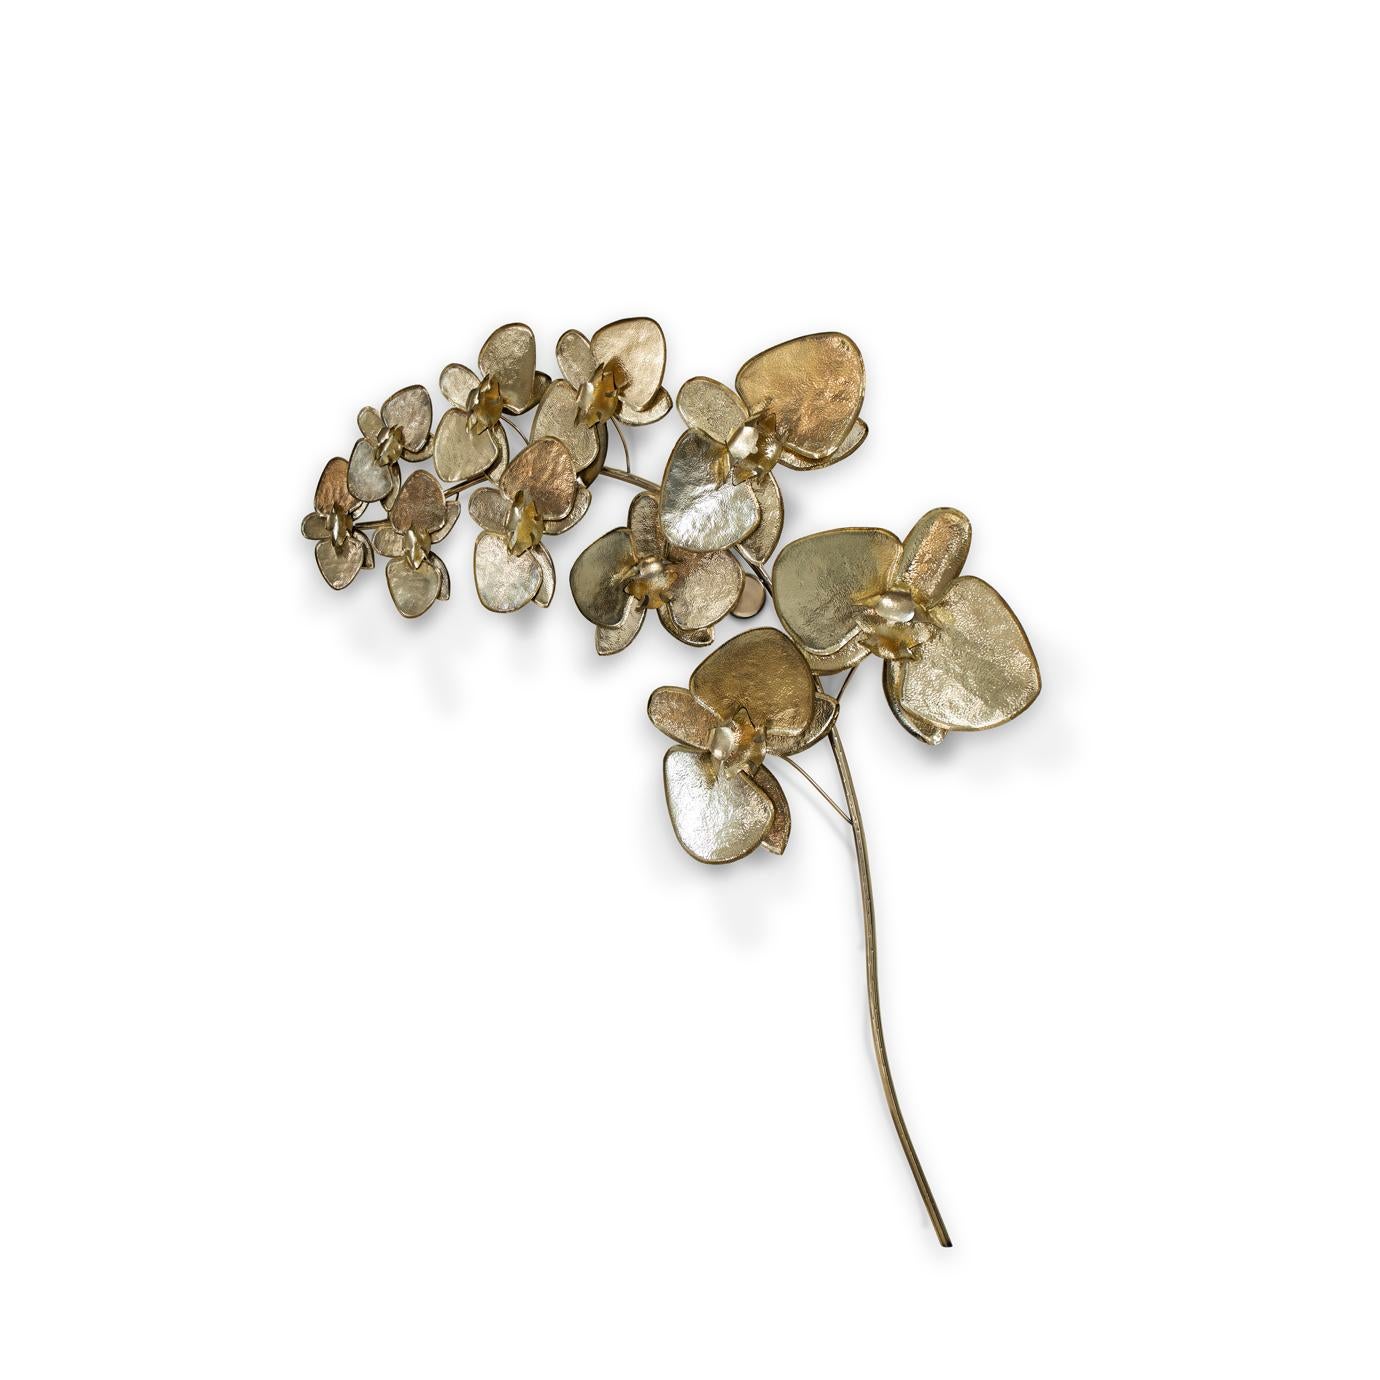 Representative of love, luxury, beauty, and strength, delicate metal orchids gracefully curve across the artisanal Orchidea Sculpture. Each orchid bloom is carefully hammered by hand creating intricate detailing and an overall stunning exotic work